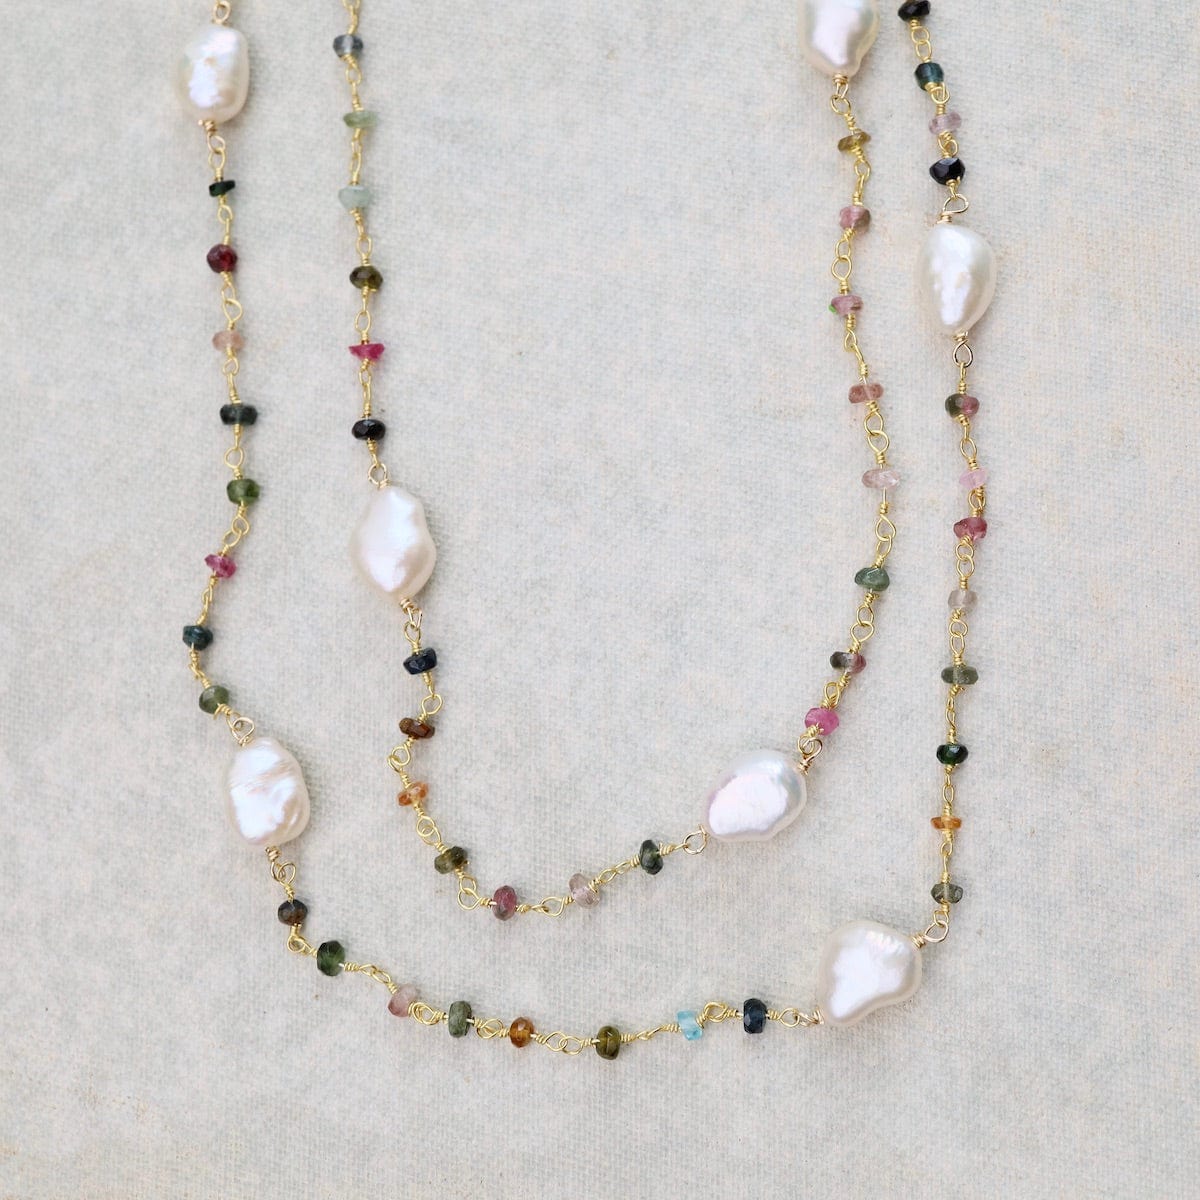 NKL-GF White Pearl &  Tourmaline Necklace